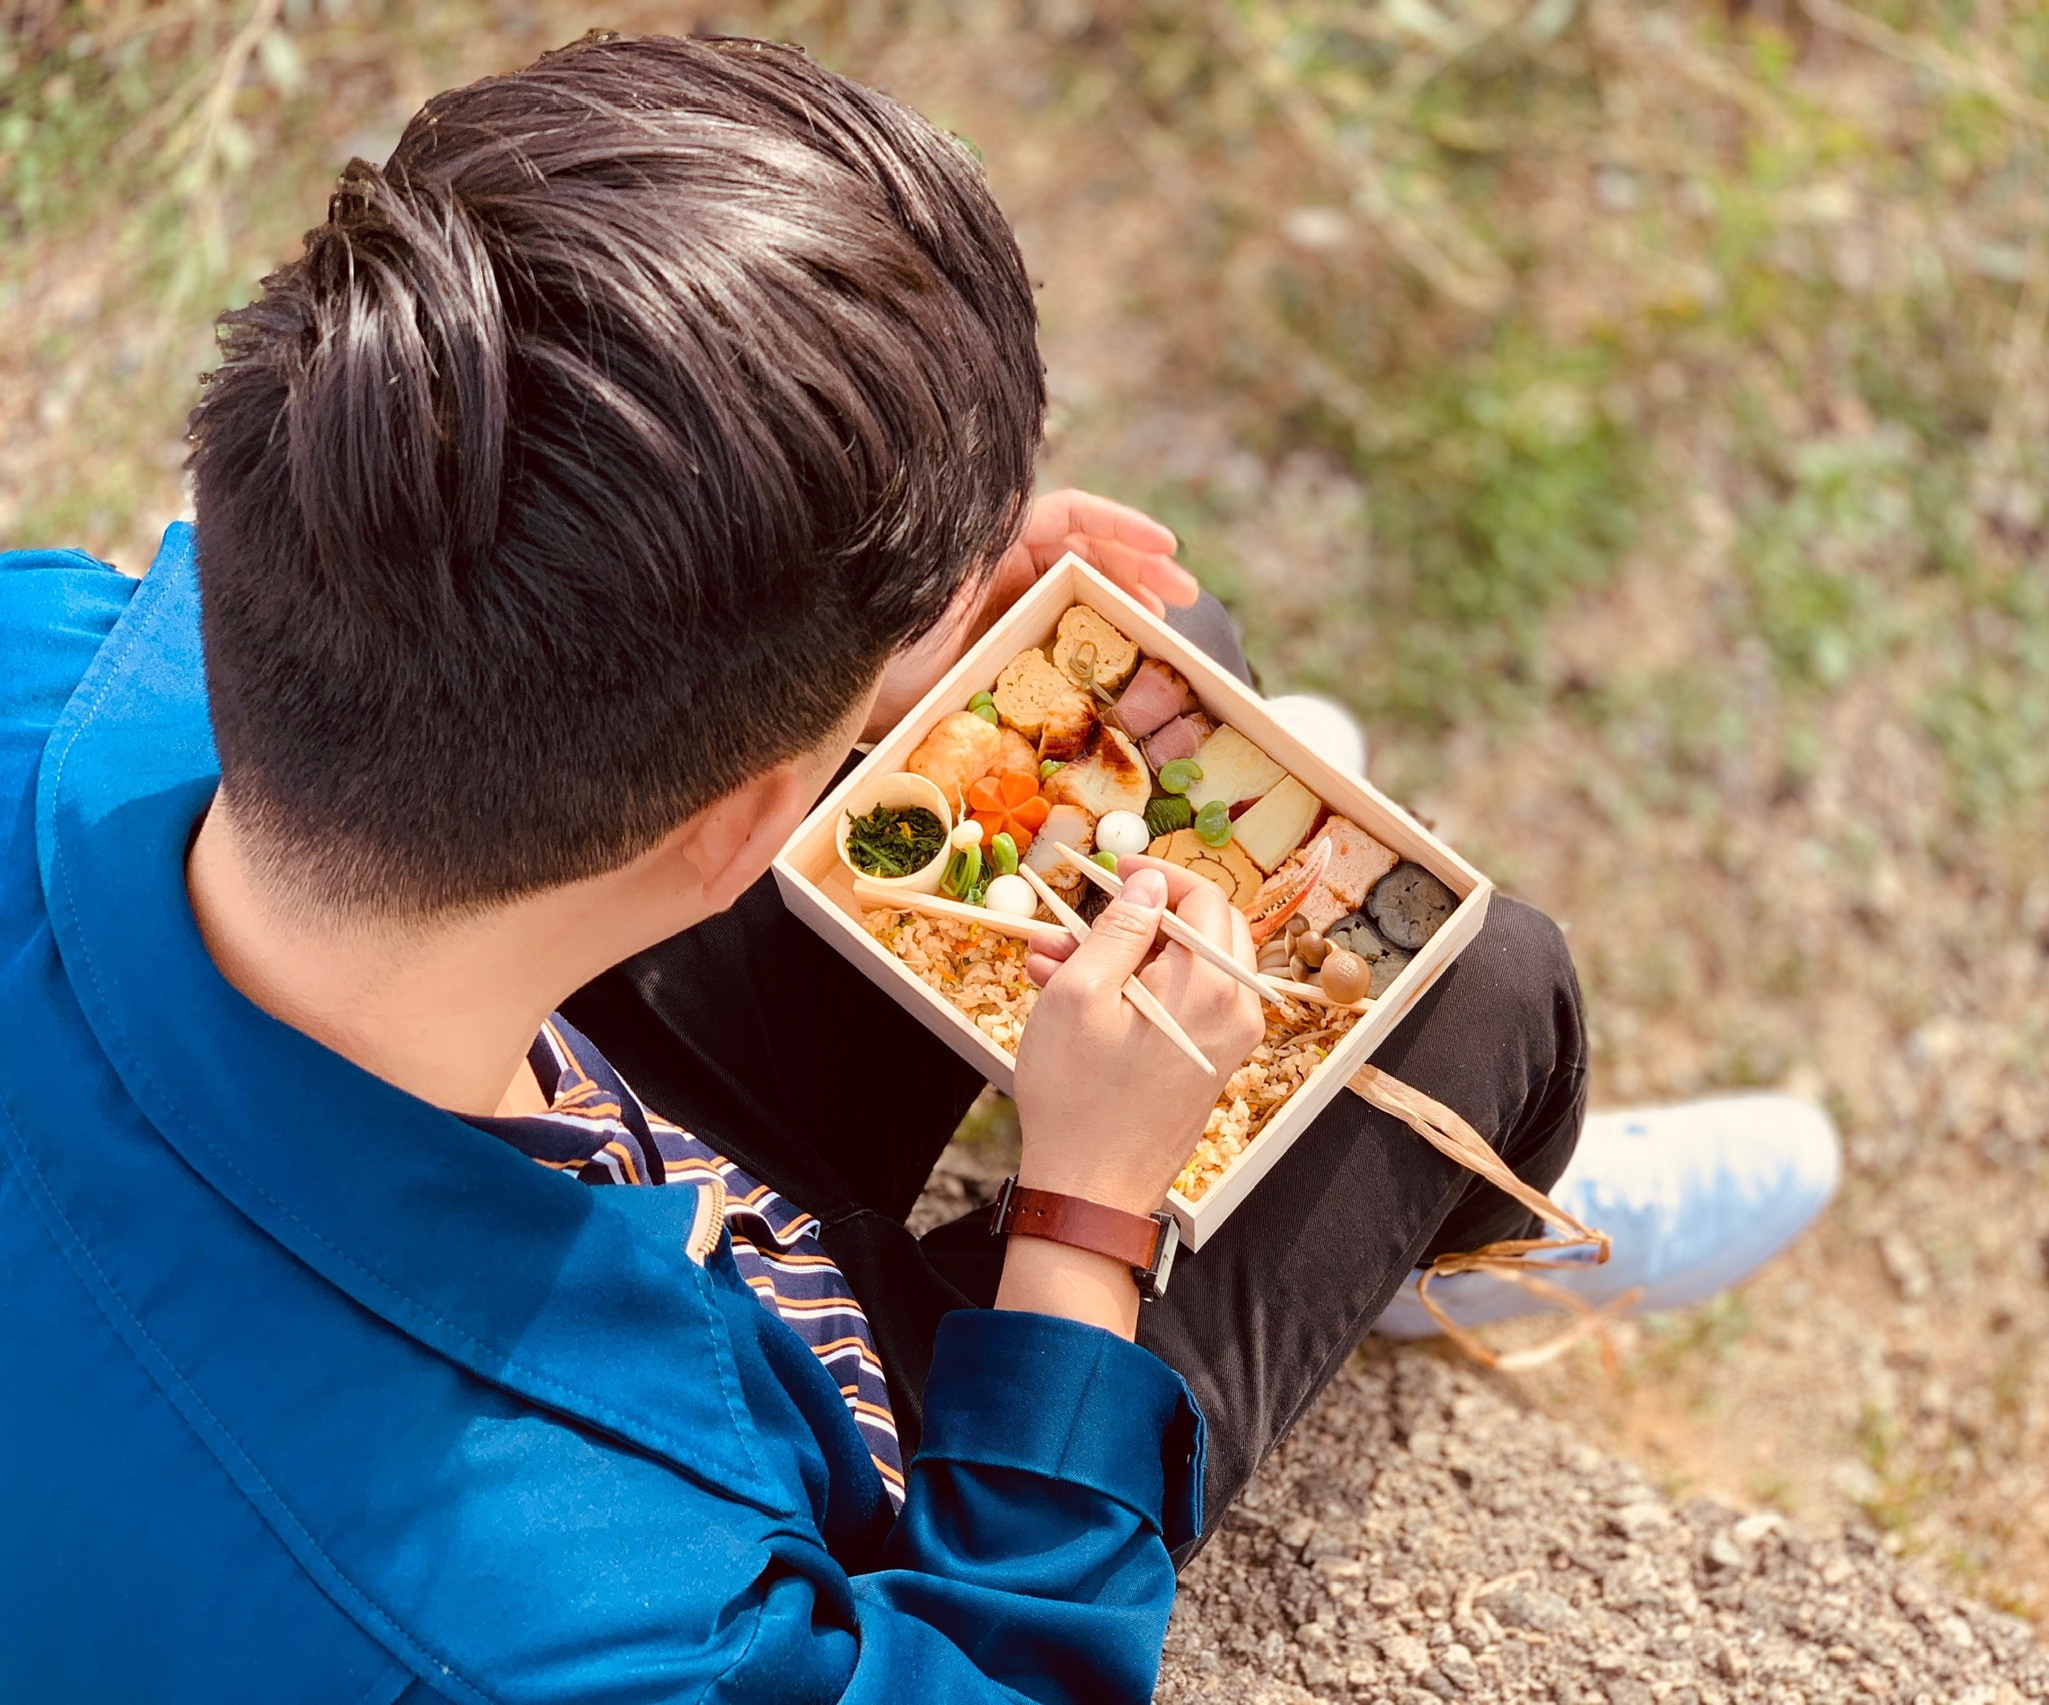 Man sitting outdoors with a bento box in his lap.